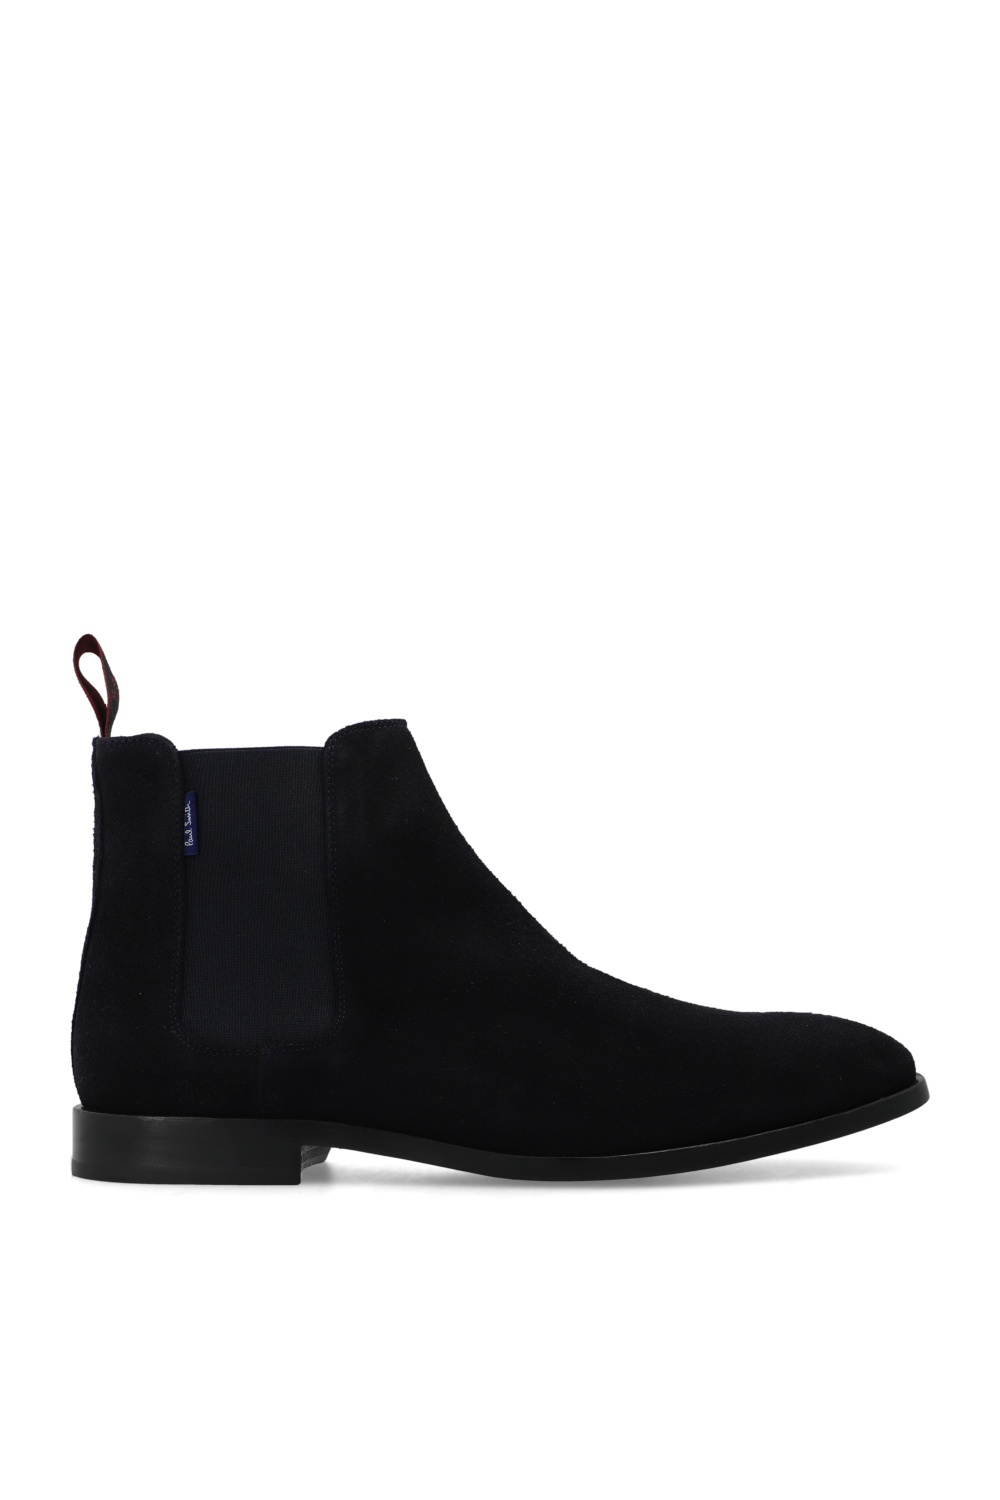 PS Paul Smith ‘Gerald’ sunglasses ankle boots